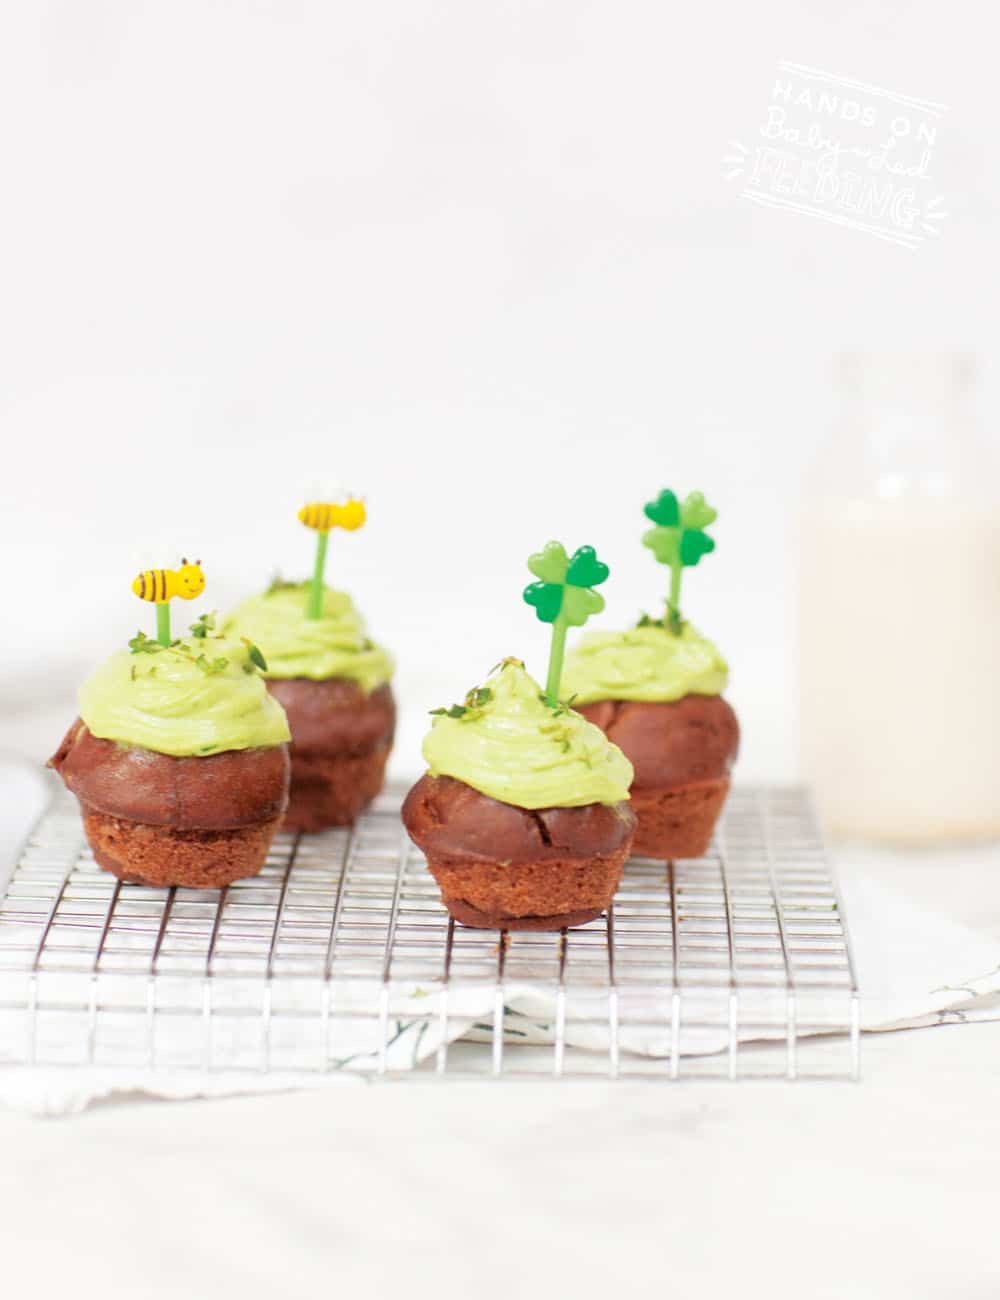 Healthy Brownie Bites for Baby Led Weaning. Refined sugar-free naturally sweetened with bananas! Vegan frosting naturally sweetened and colored! Healthy St. Patrick's Day recipe for kids! #irish #stpatricksday #browniebites #refinedsugarfree #bananas #babyledweaning #babyledfeeding #babyfood #fingerfood #partyfood #makeahead